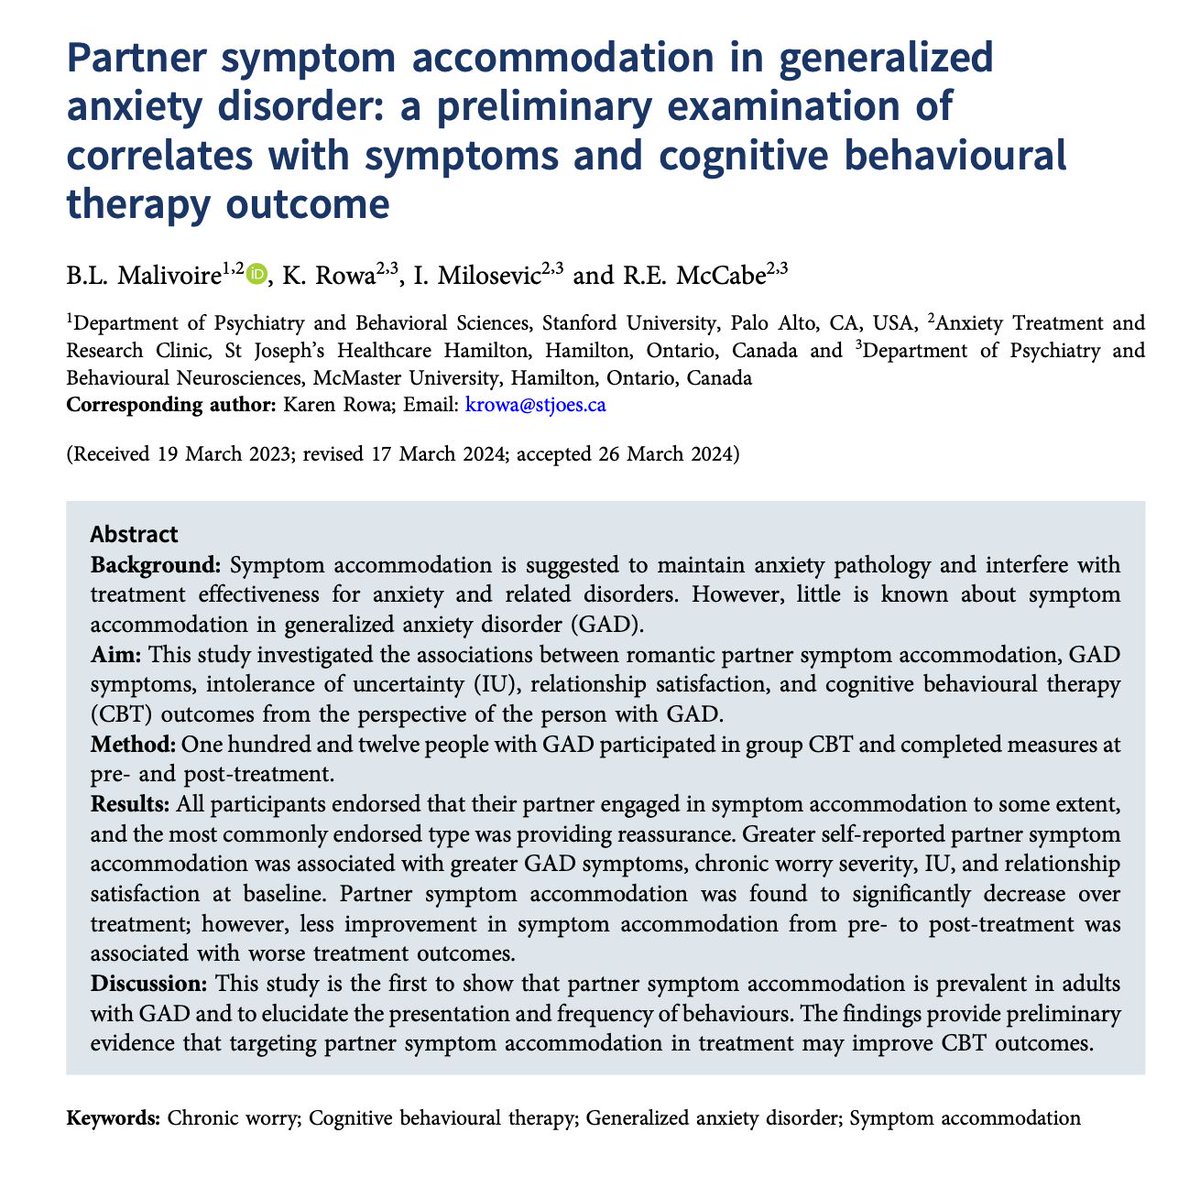 BCP FirstView paper   Partner symptom accommodation in generalized anxiety disorder: a preliminary examination of correlates with symptoms and cognitive behavioural therapy outcome. 

Full free paper at buff.ly/4dos9L0